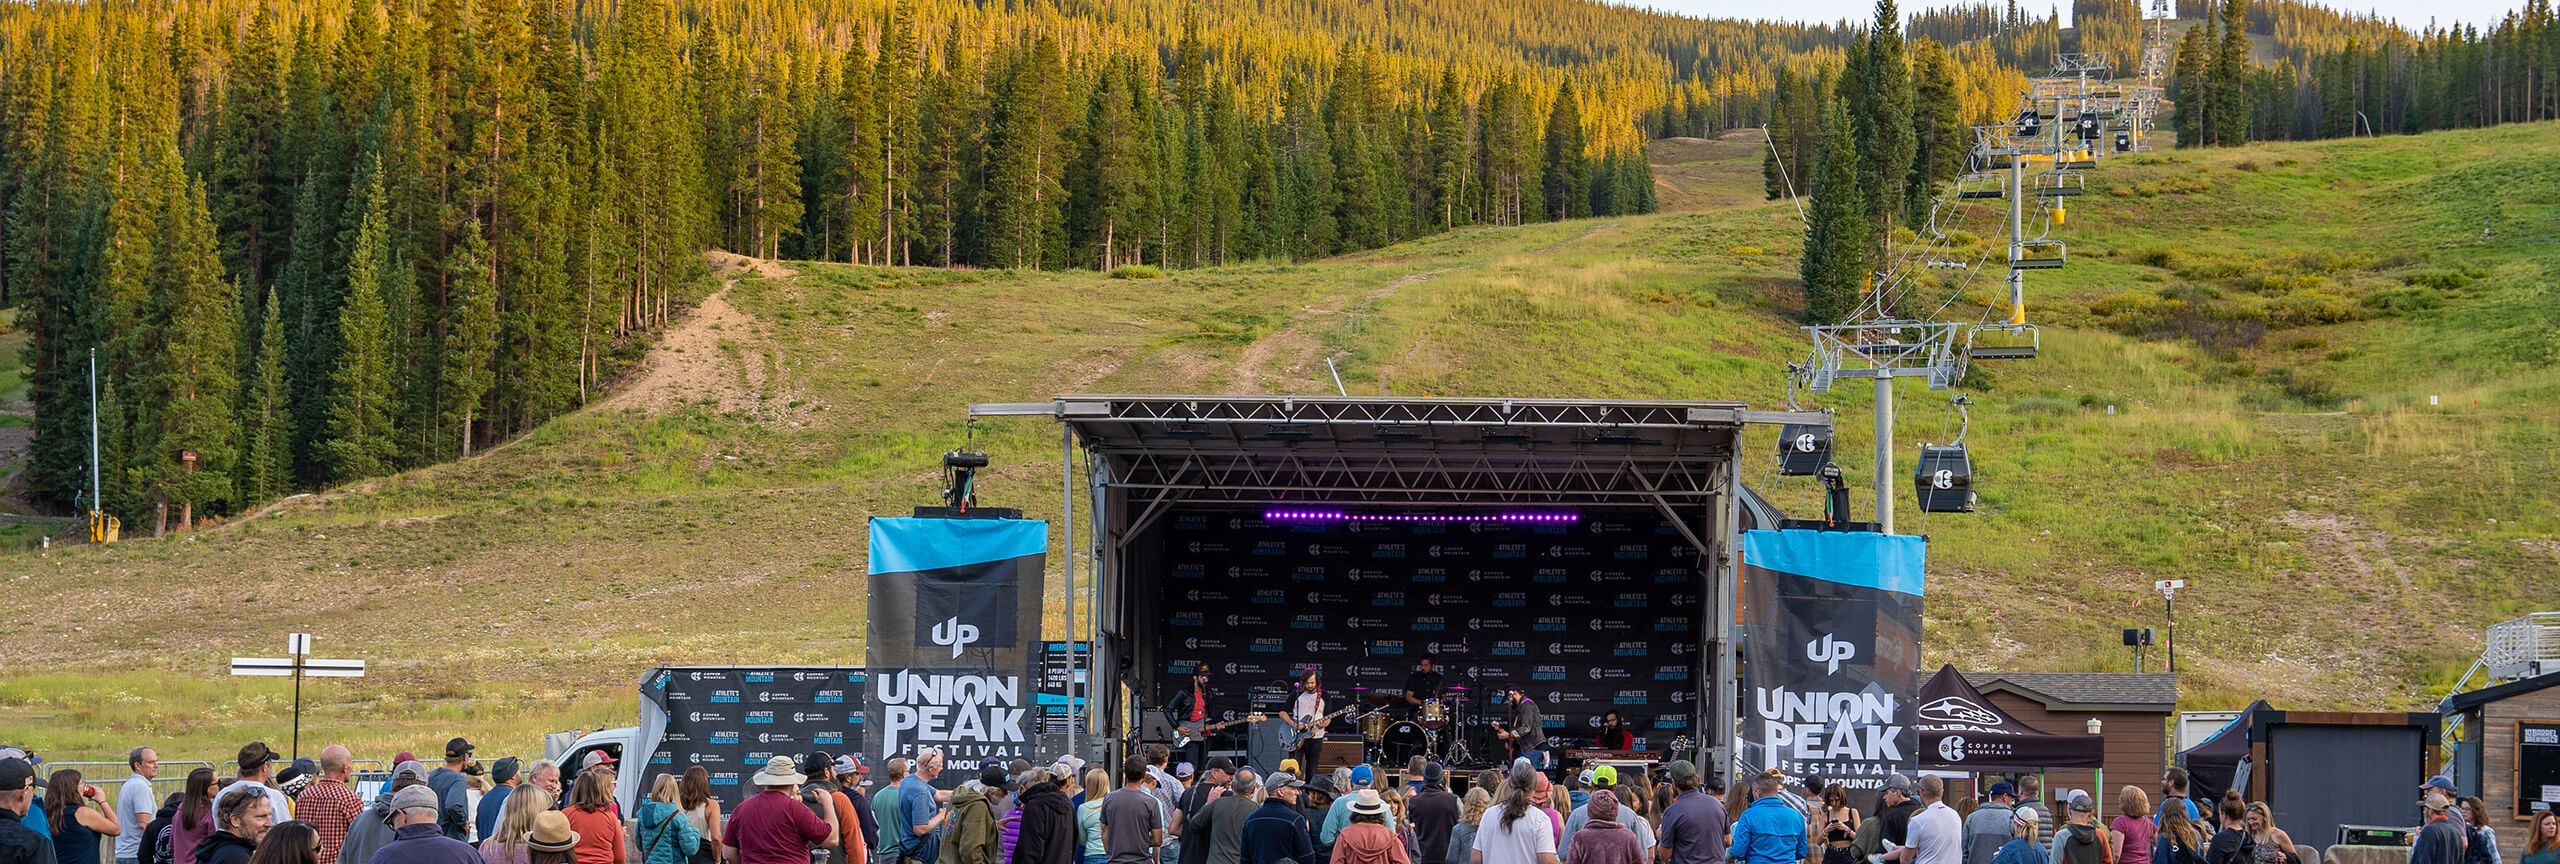 Stage for Union Peak Festival at Copper Mountain